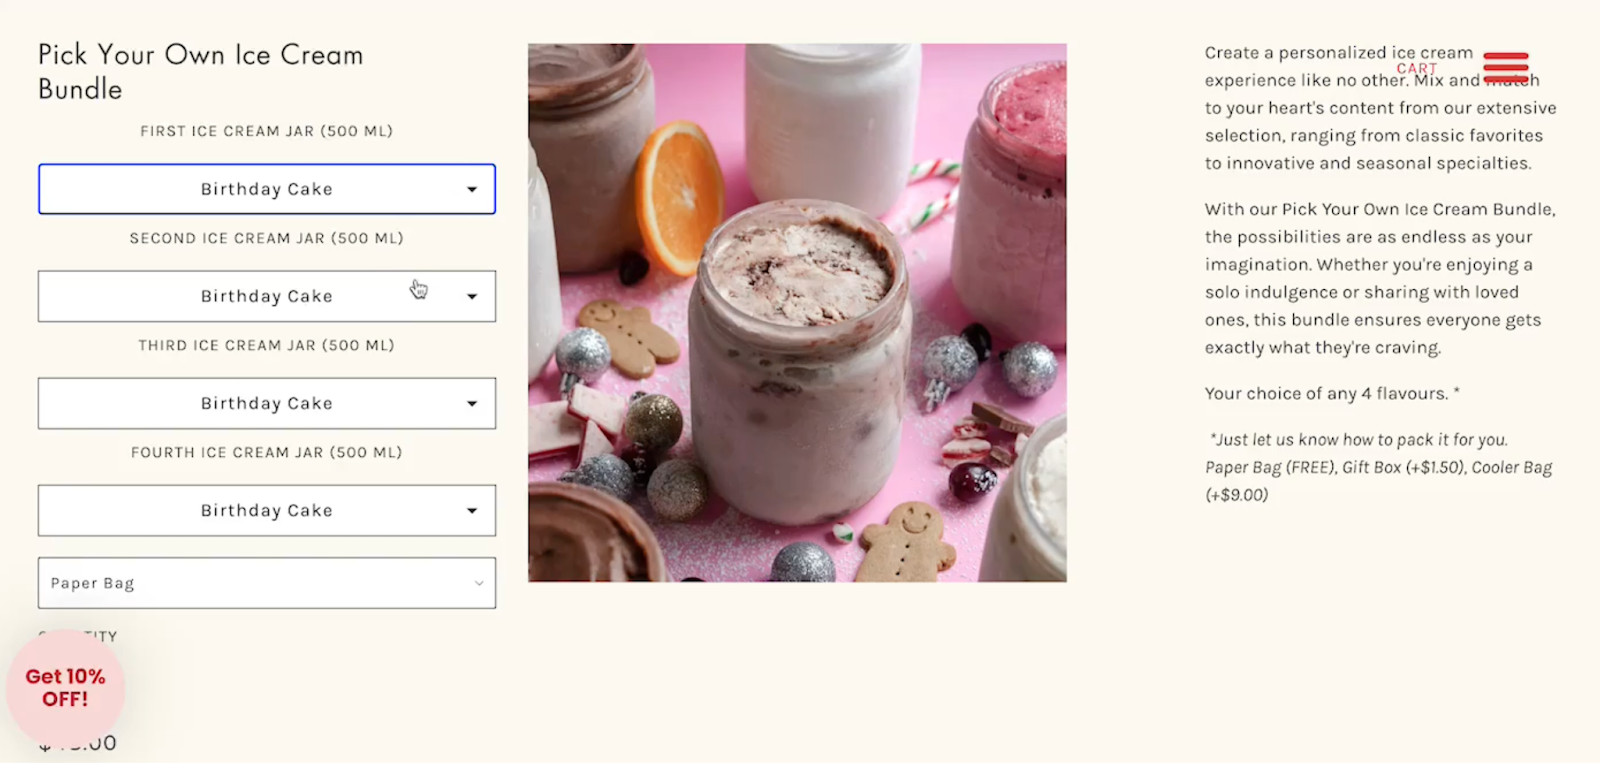 Screenshot of Four All Ice Cream's Pick Your Own Ice Cream Bundle on its website.